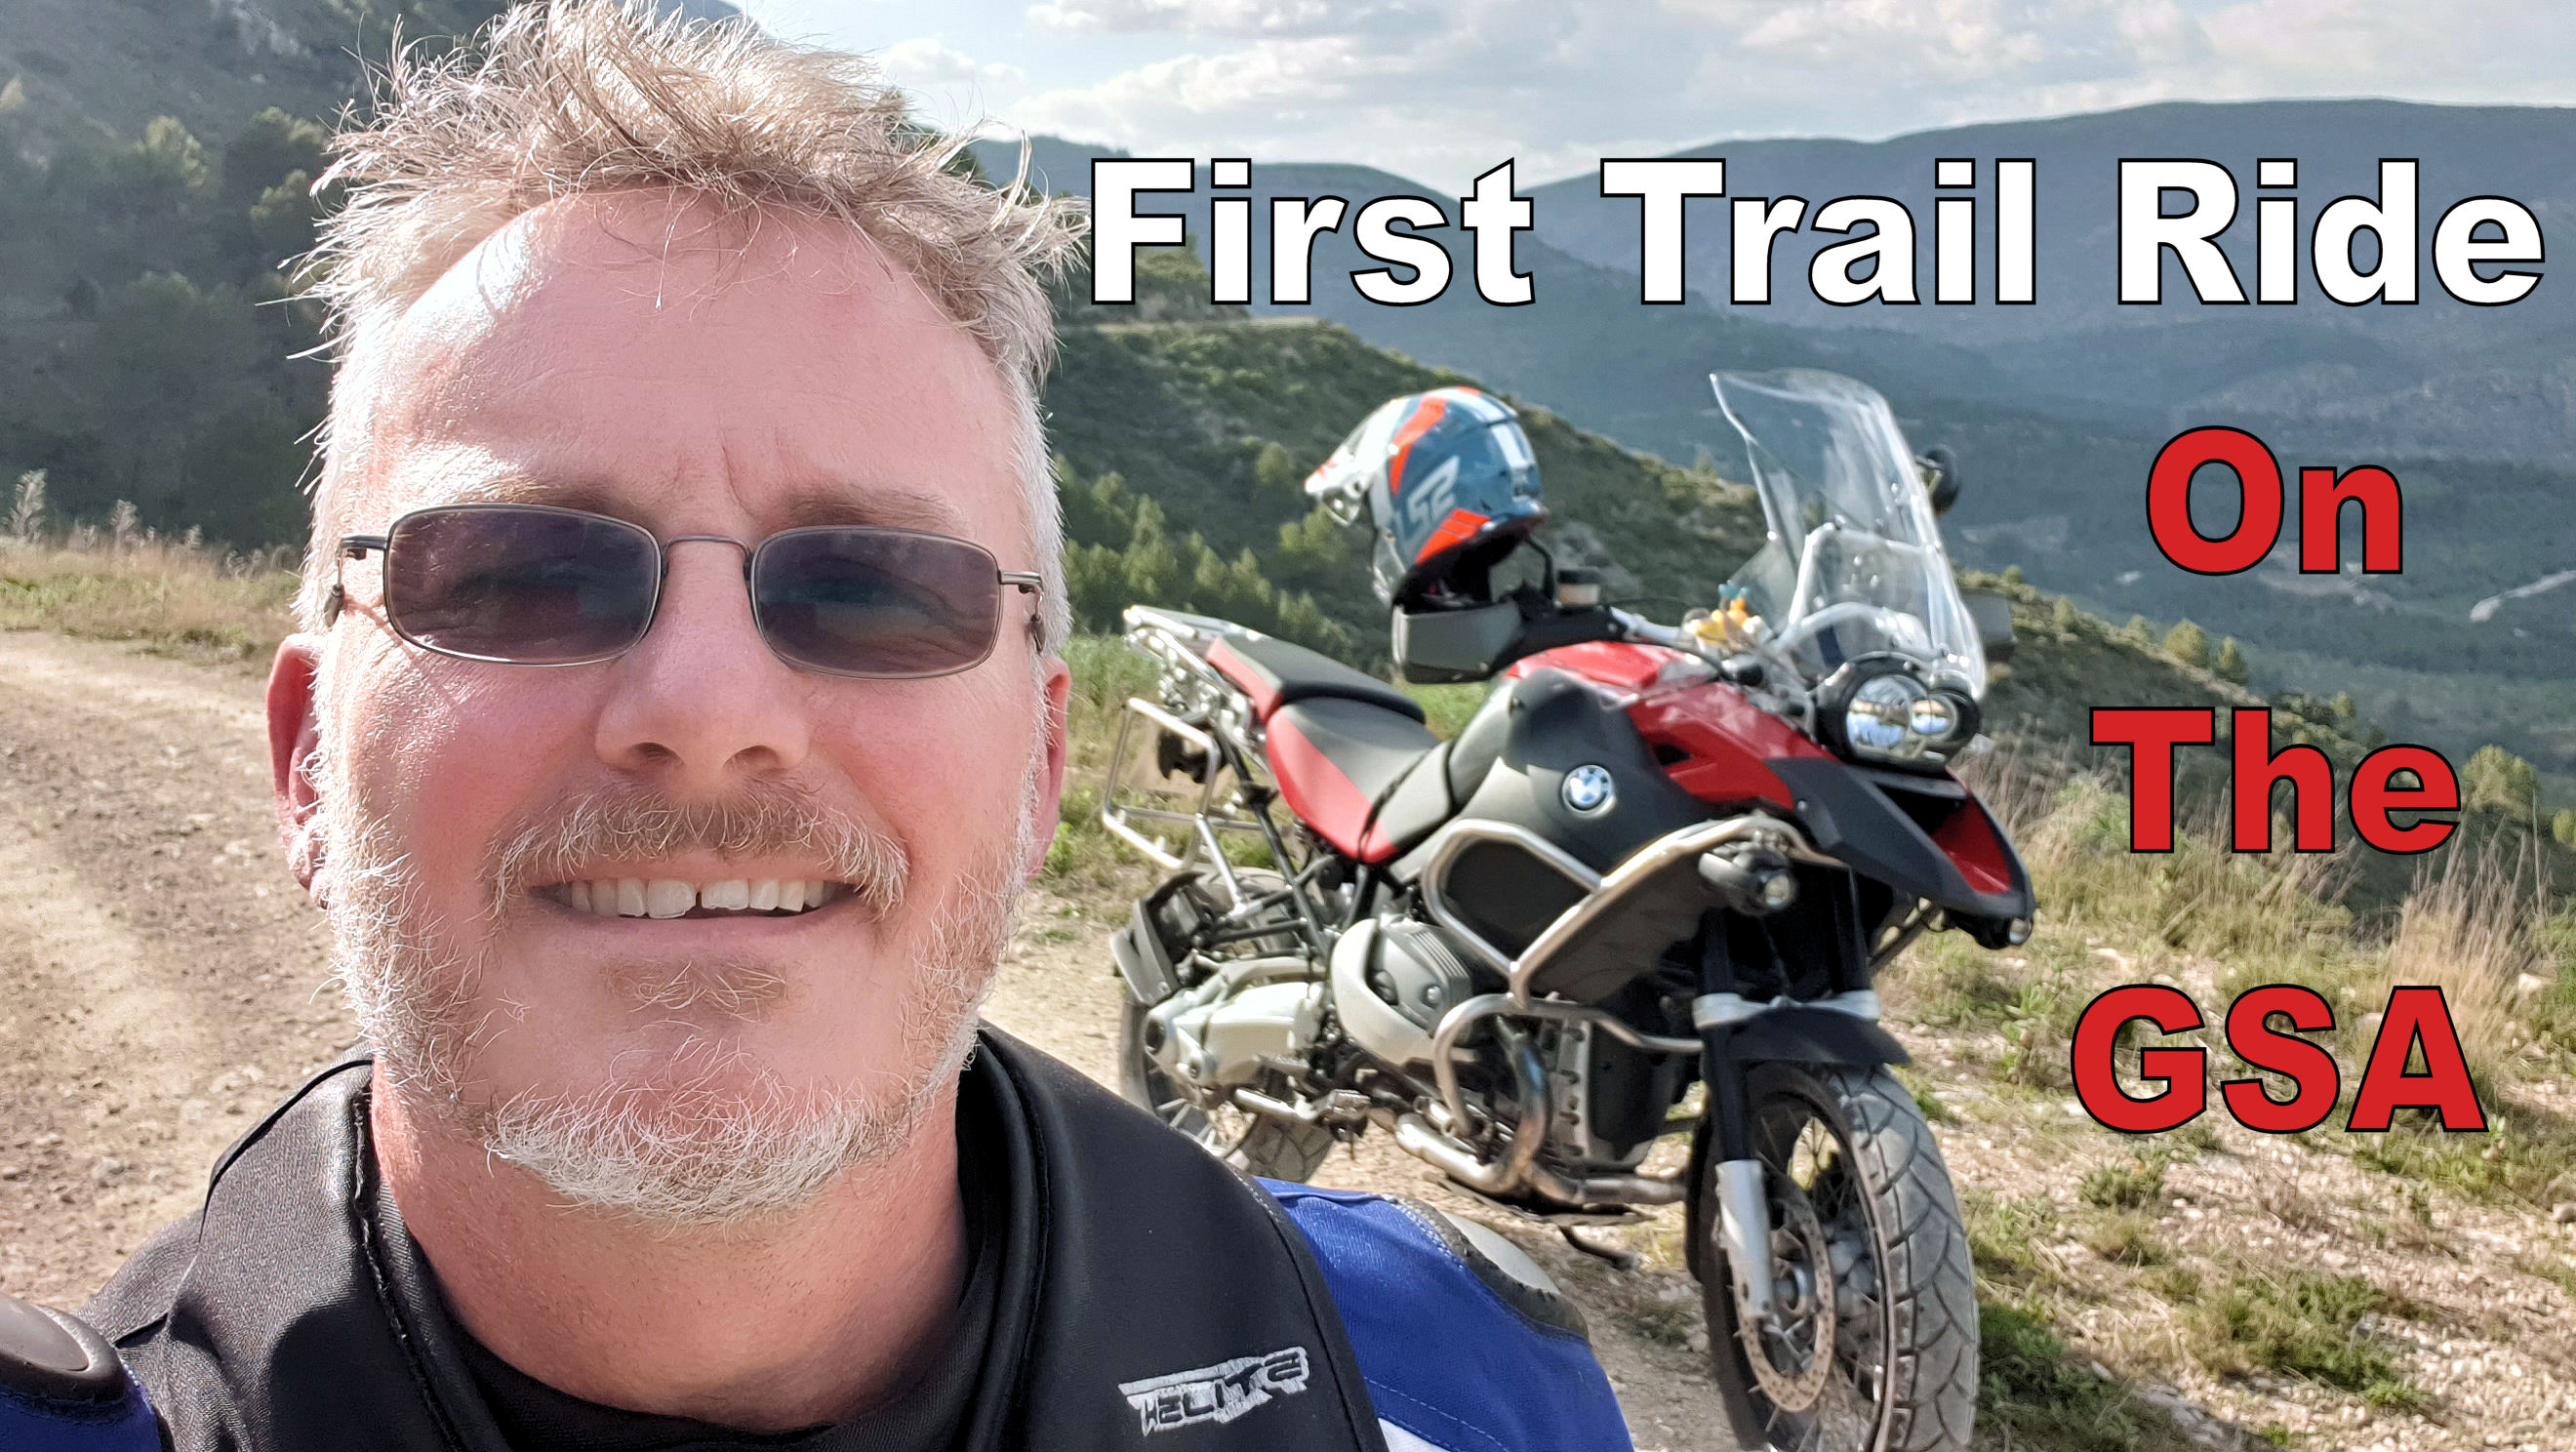 Chris from Bikers España stood with a BMW R1200GSA in the mountains